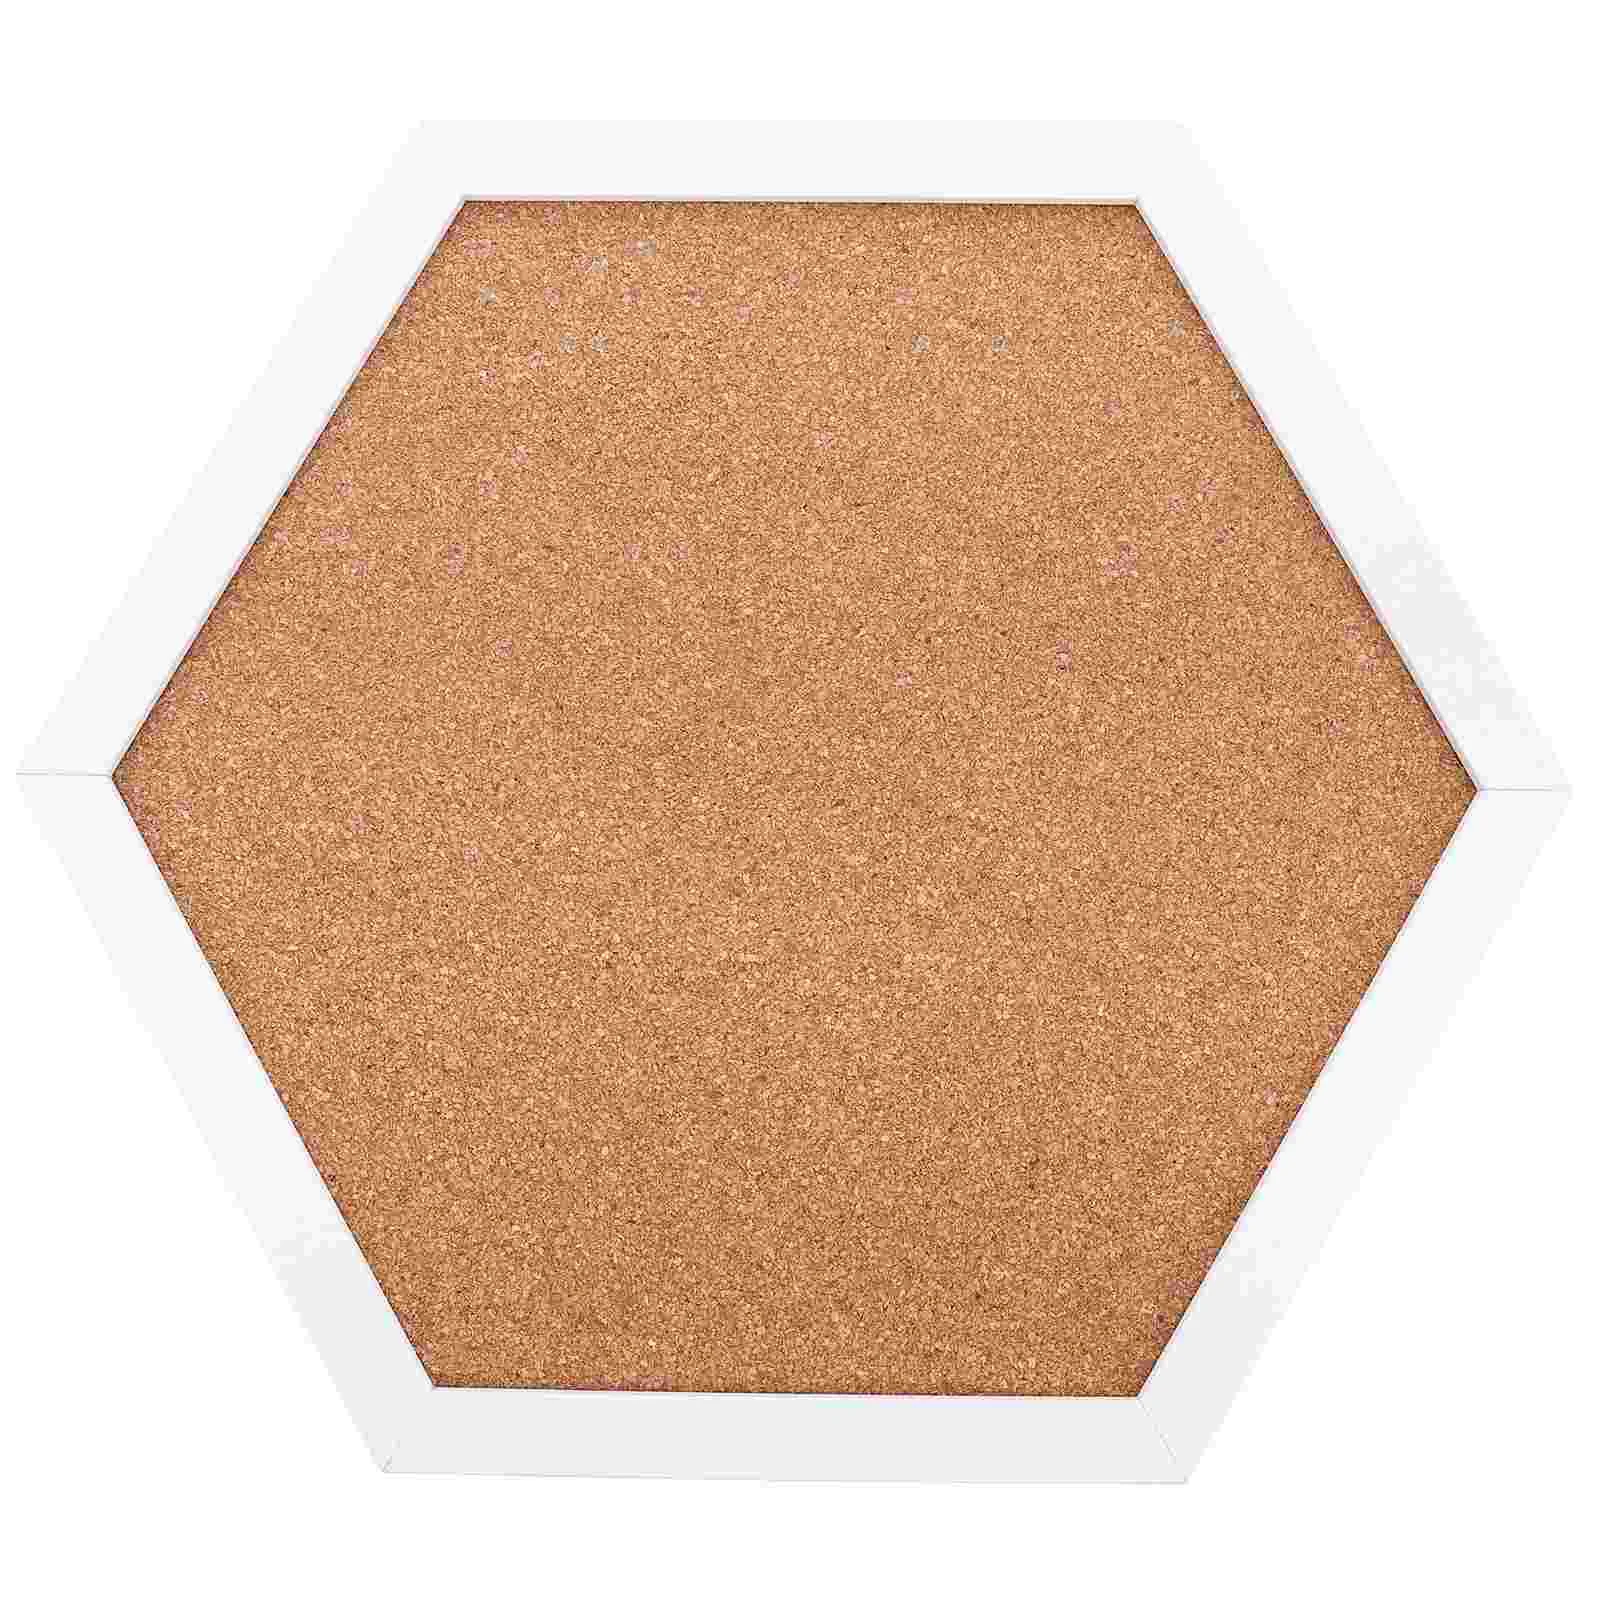 

Board Cork Pin Wall Memo Hexagon Bulletin Pads Tiles Push Thick Kitchen Tackboard Boards Message Framed Up Notice Office